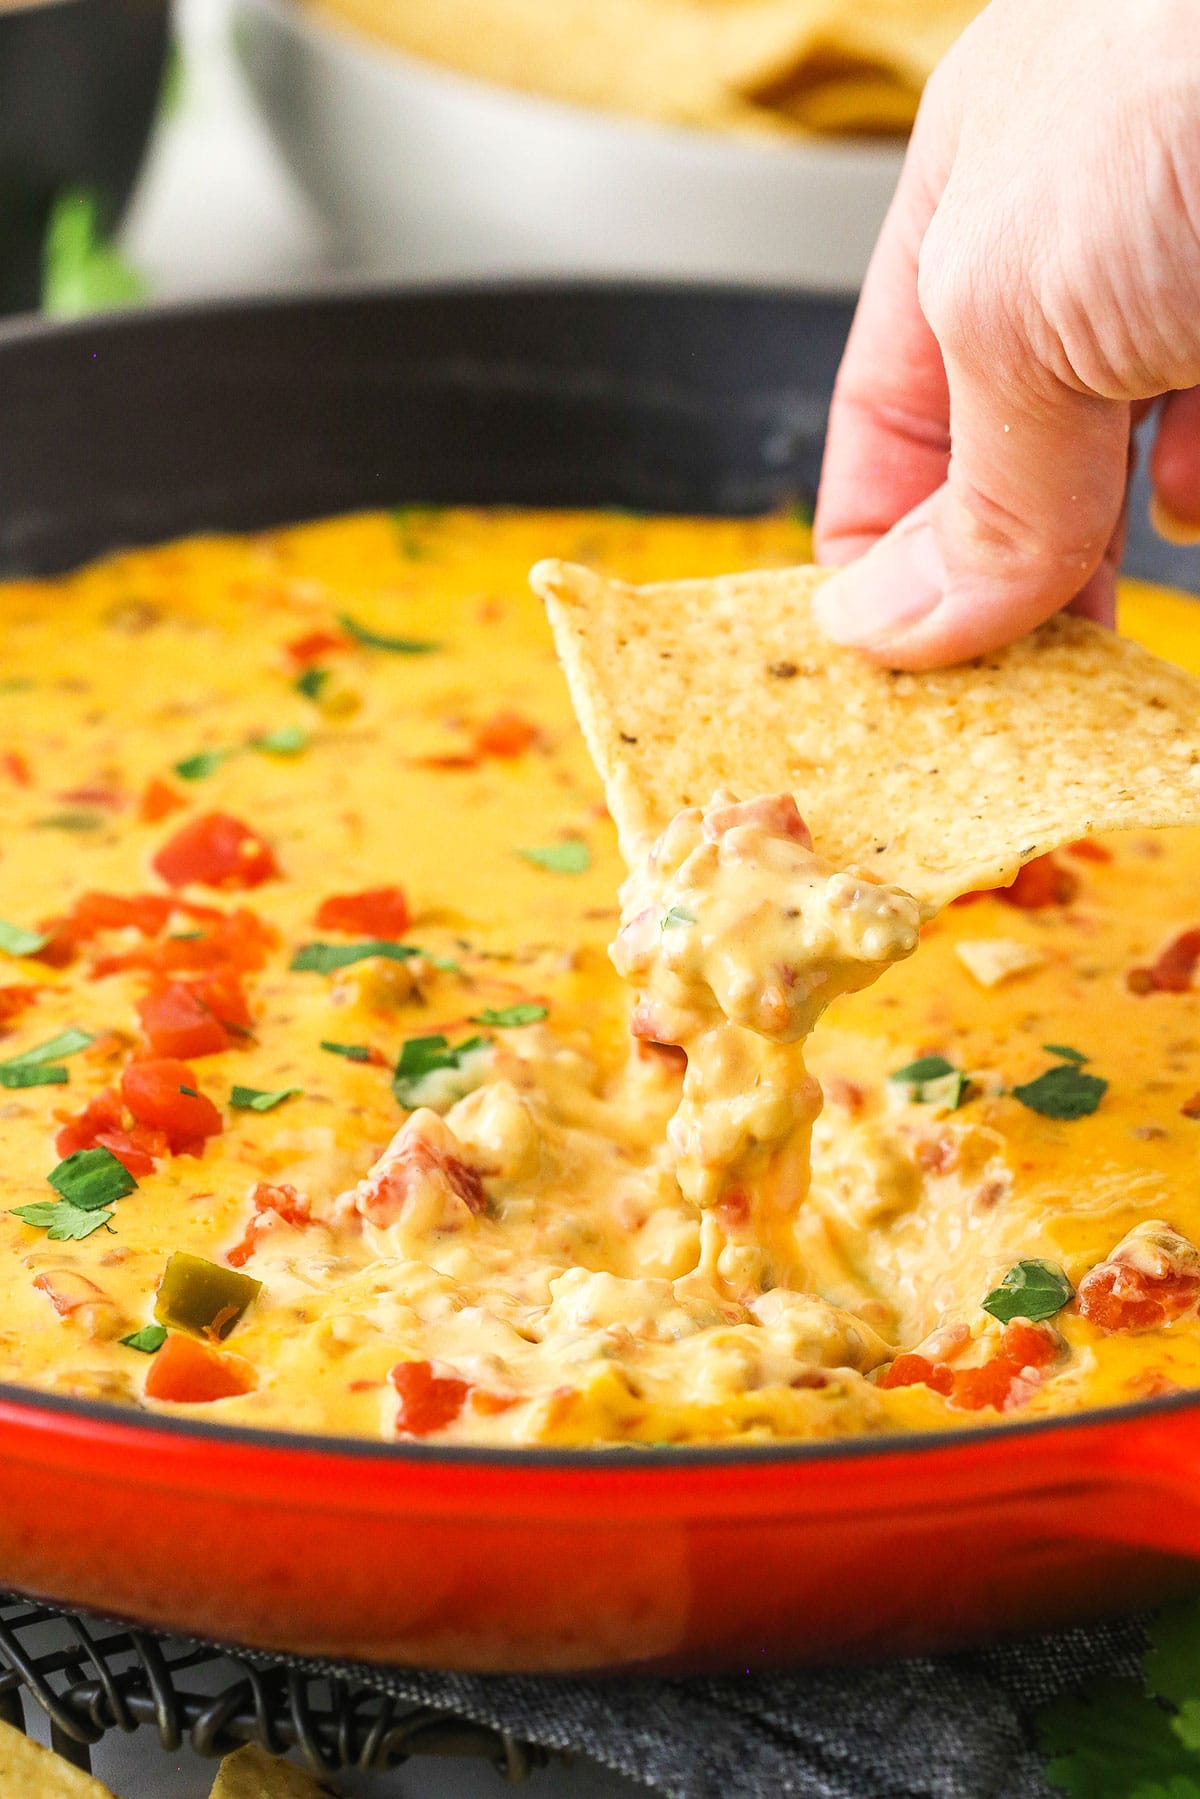 A woman's hand is dipping a tortilla chip into a skillet of cheese dip.